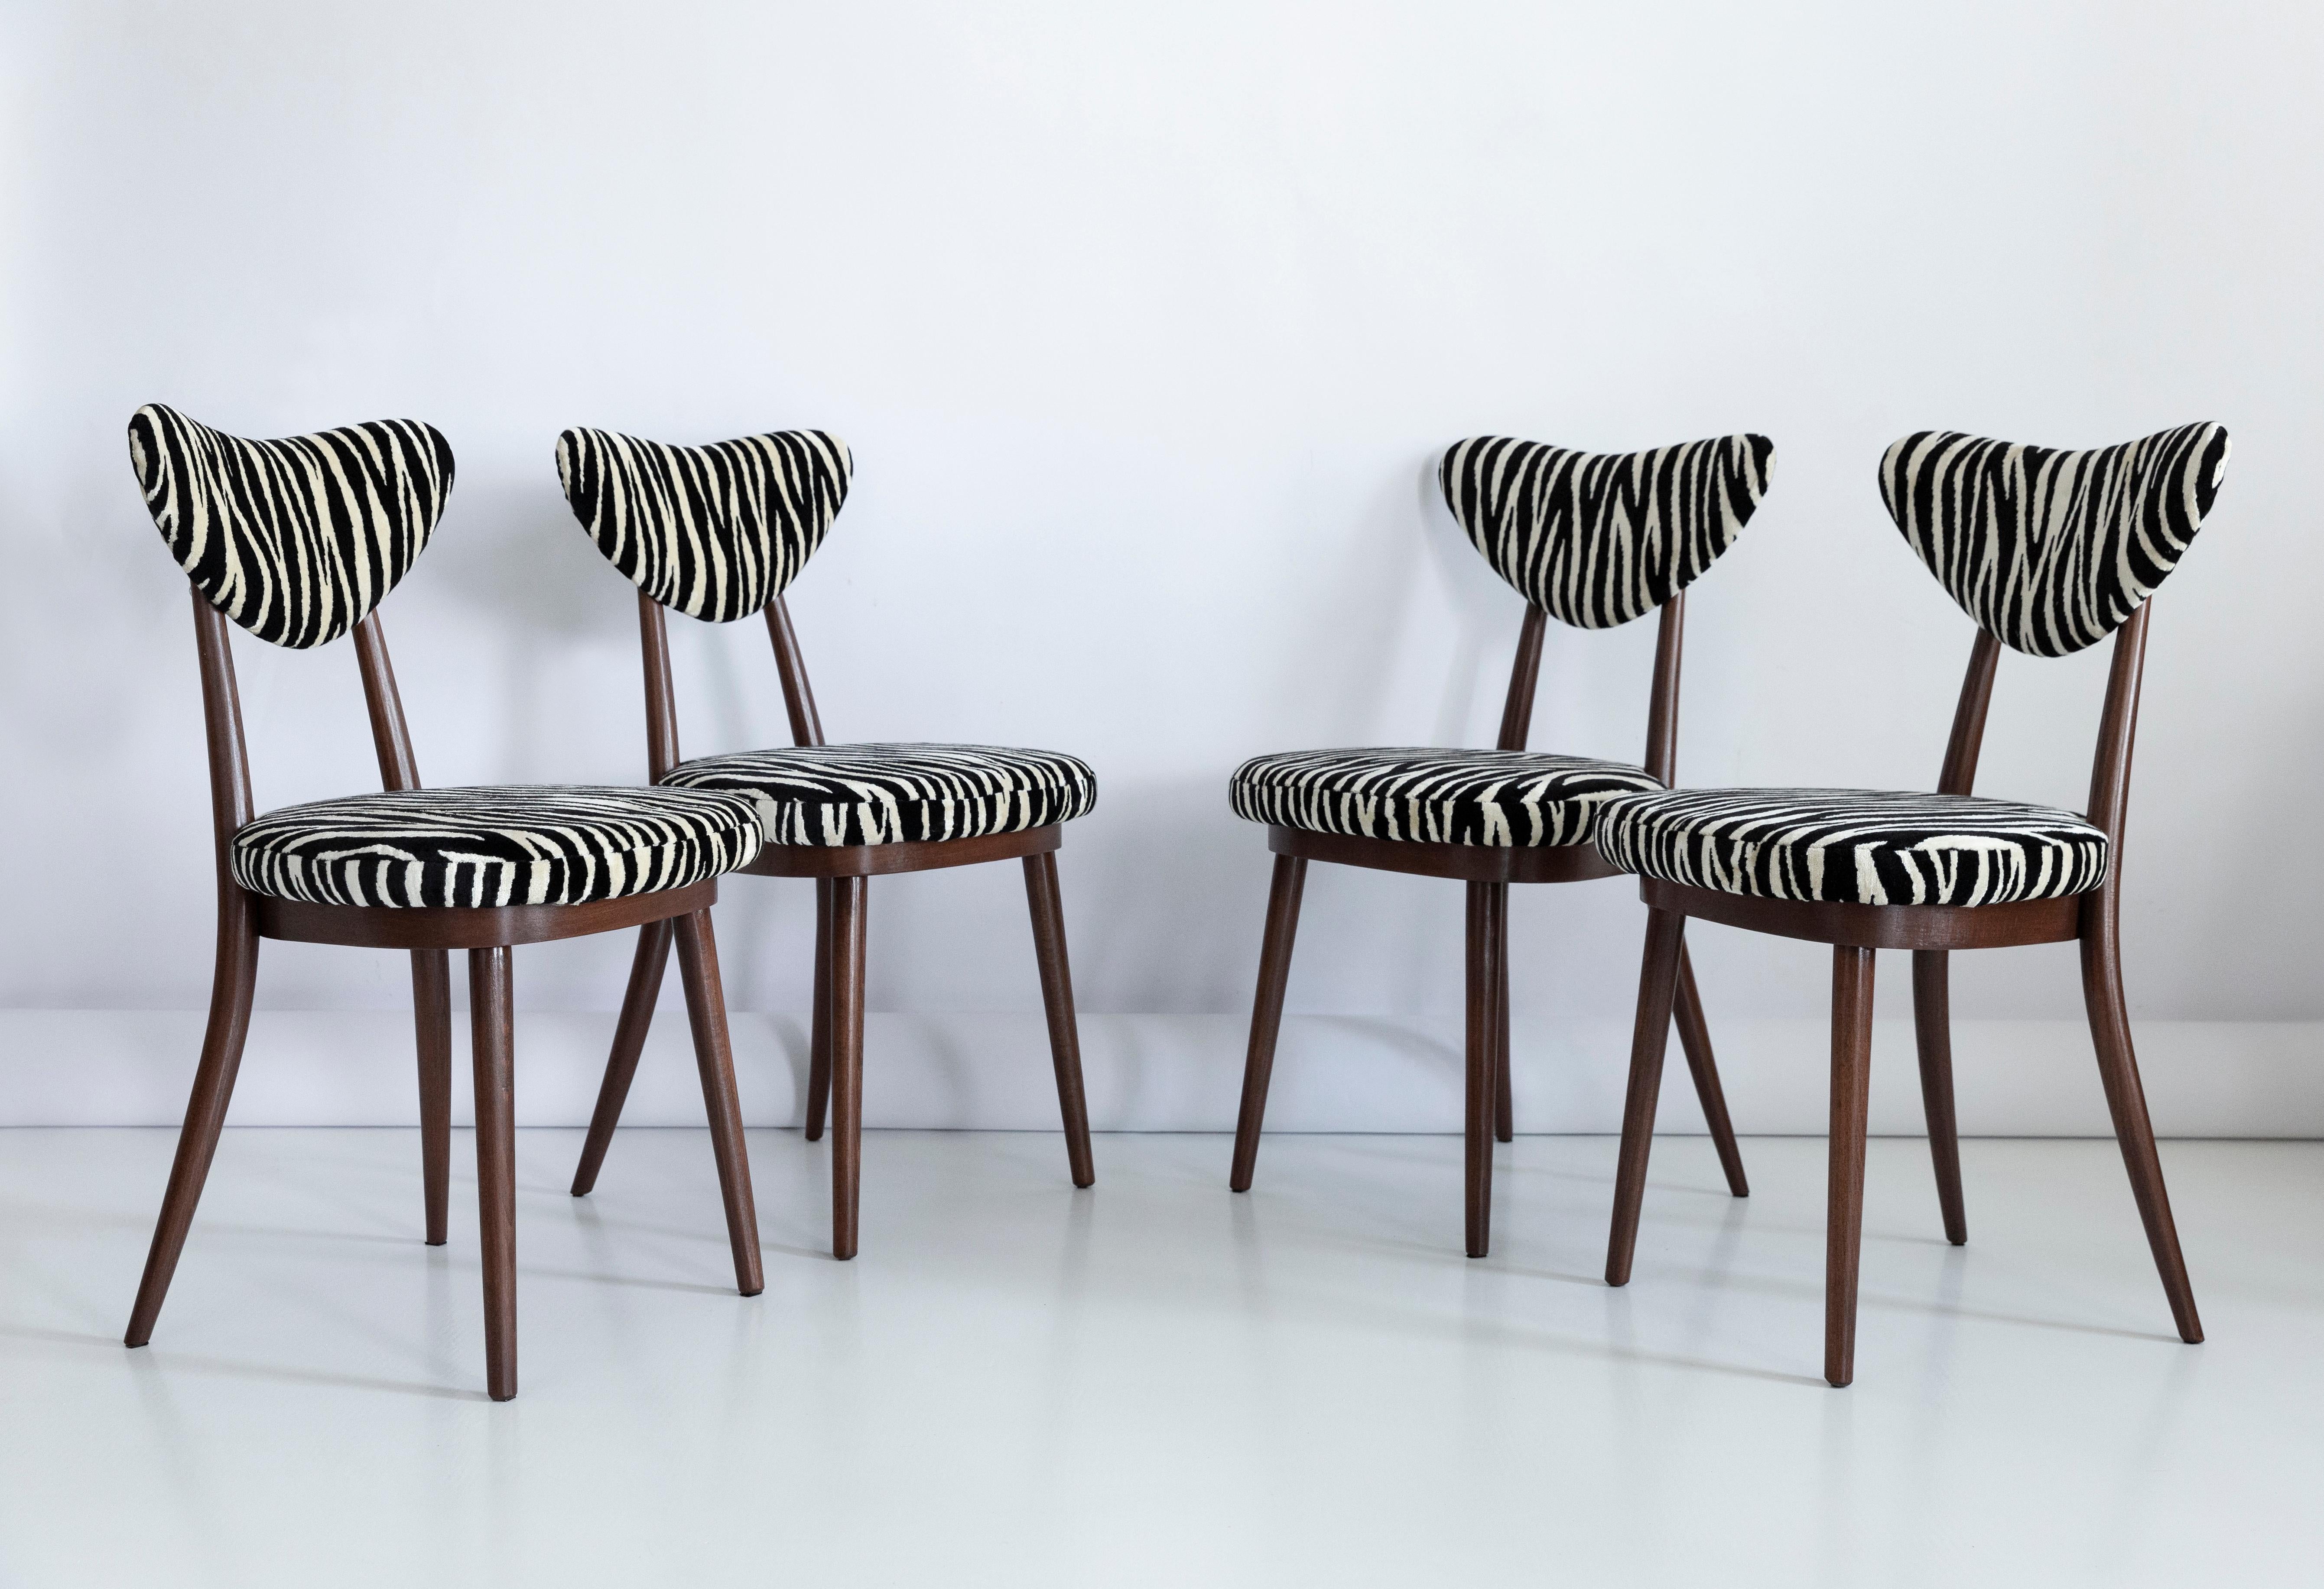 Hand-Crafted Set Midcentury Zebra Black White Heart Chairs, Hollywood Regency, Poland, 1960s For Sale